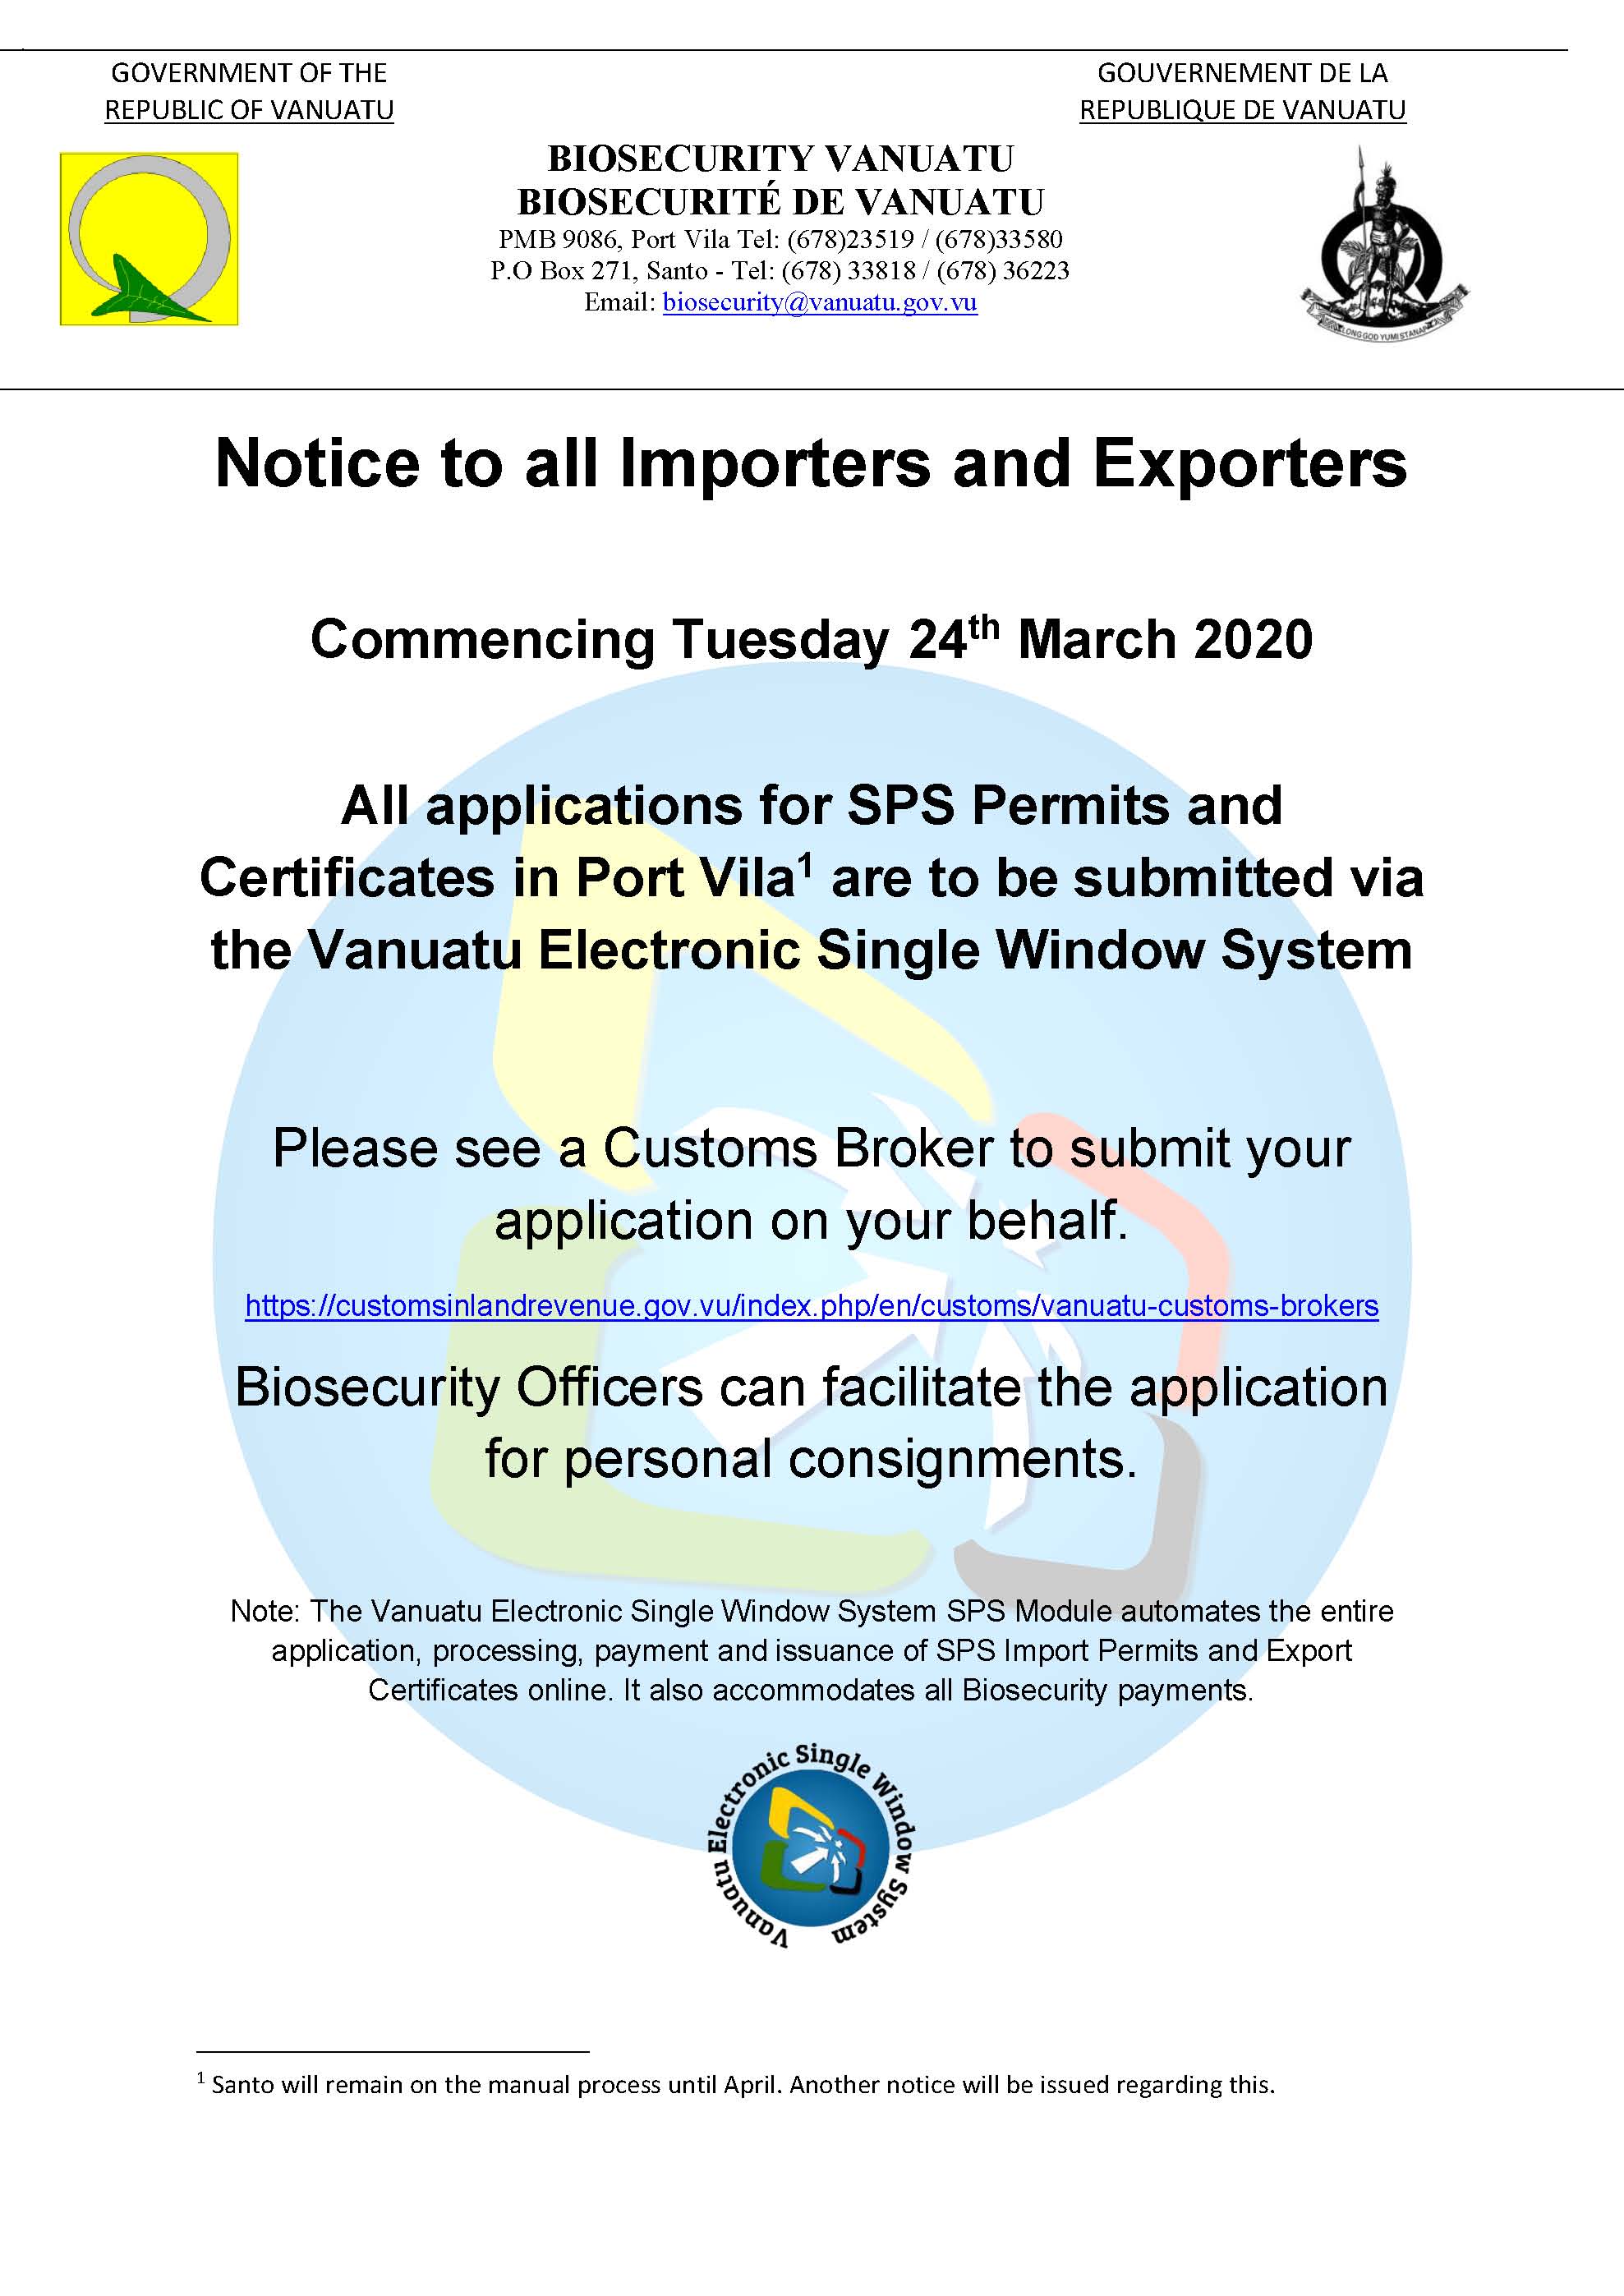 Notice to all Importers and Exporters – Vanuatu Electronic Single Window System